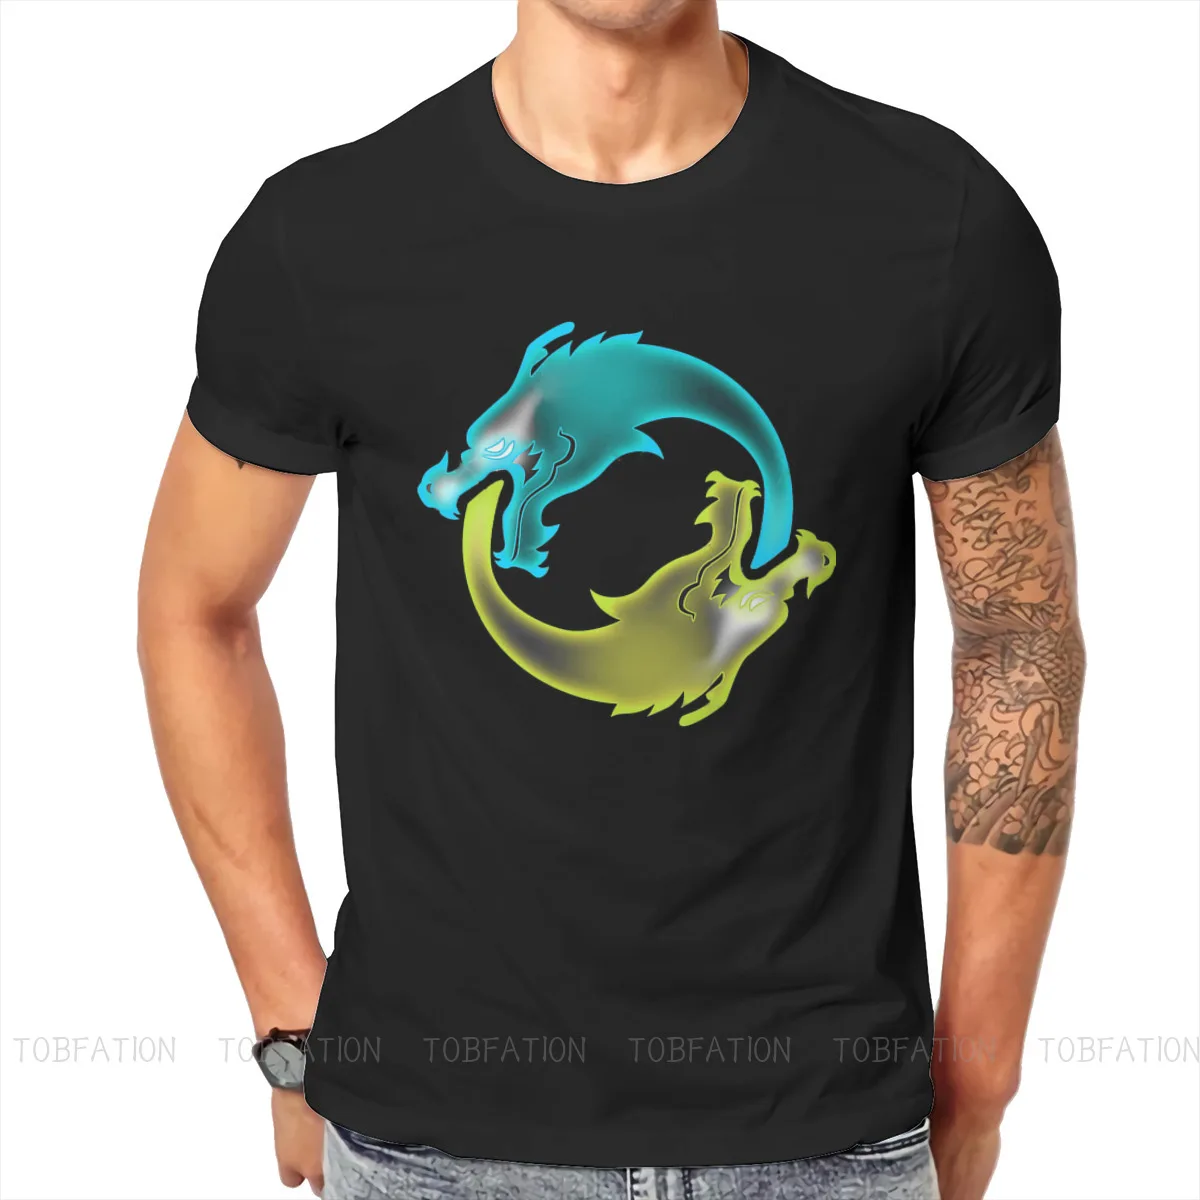 

Overwatch Original TShirts Two Dragons two Brothers Distinctive Homme T Shirt Hipster Tops 6XL